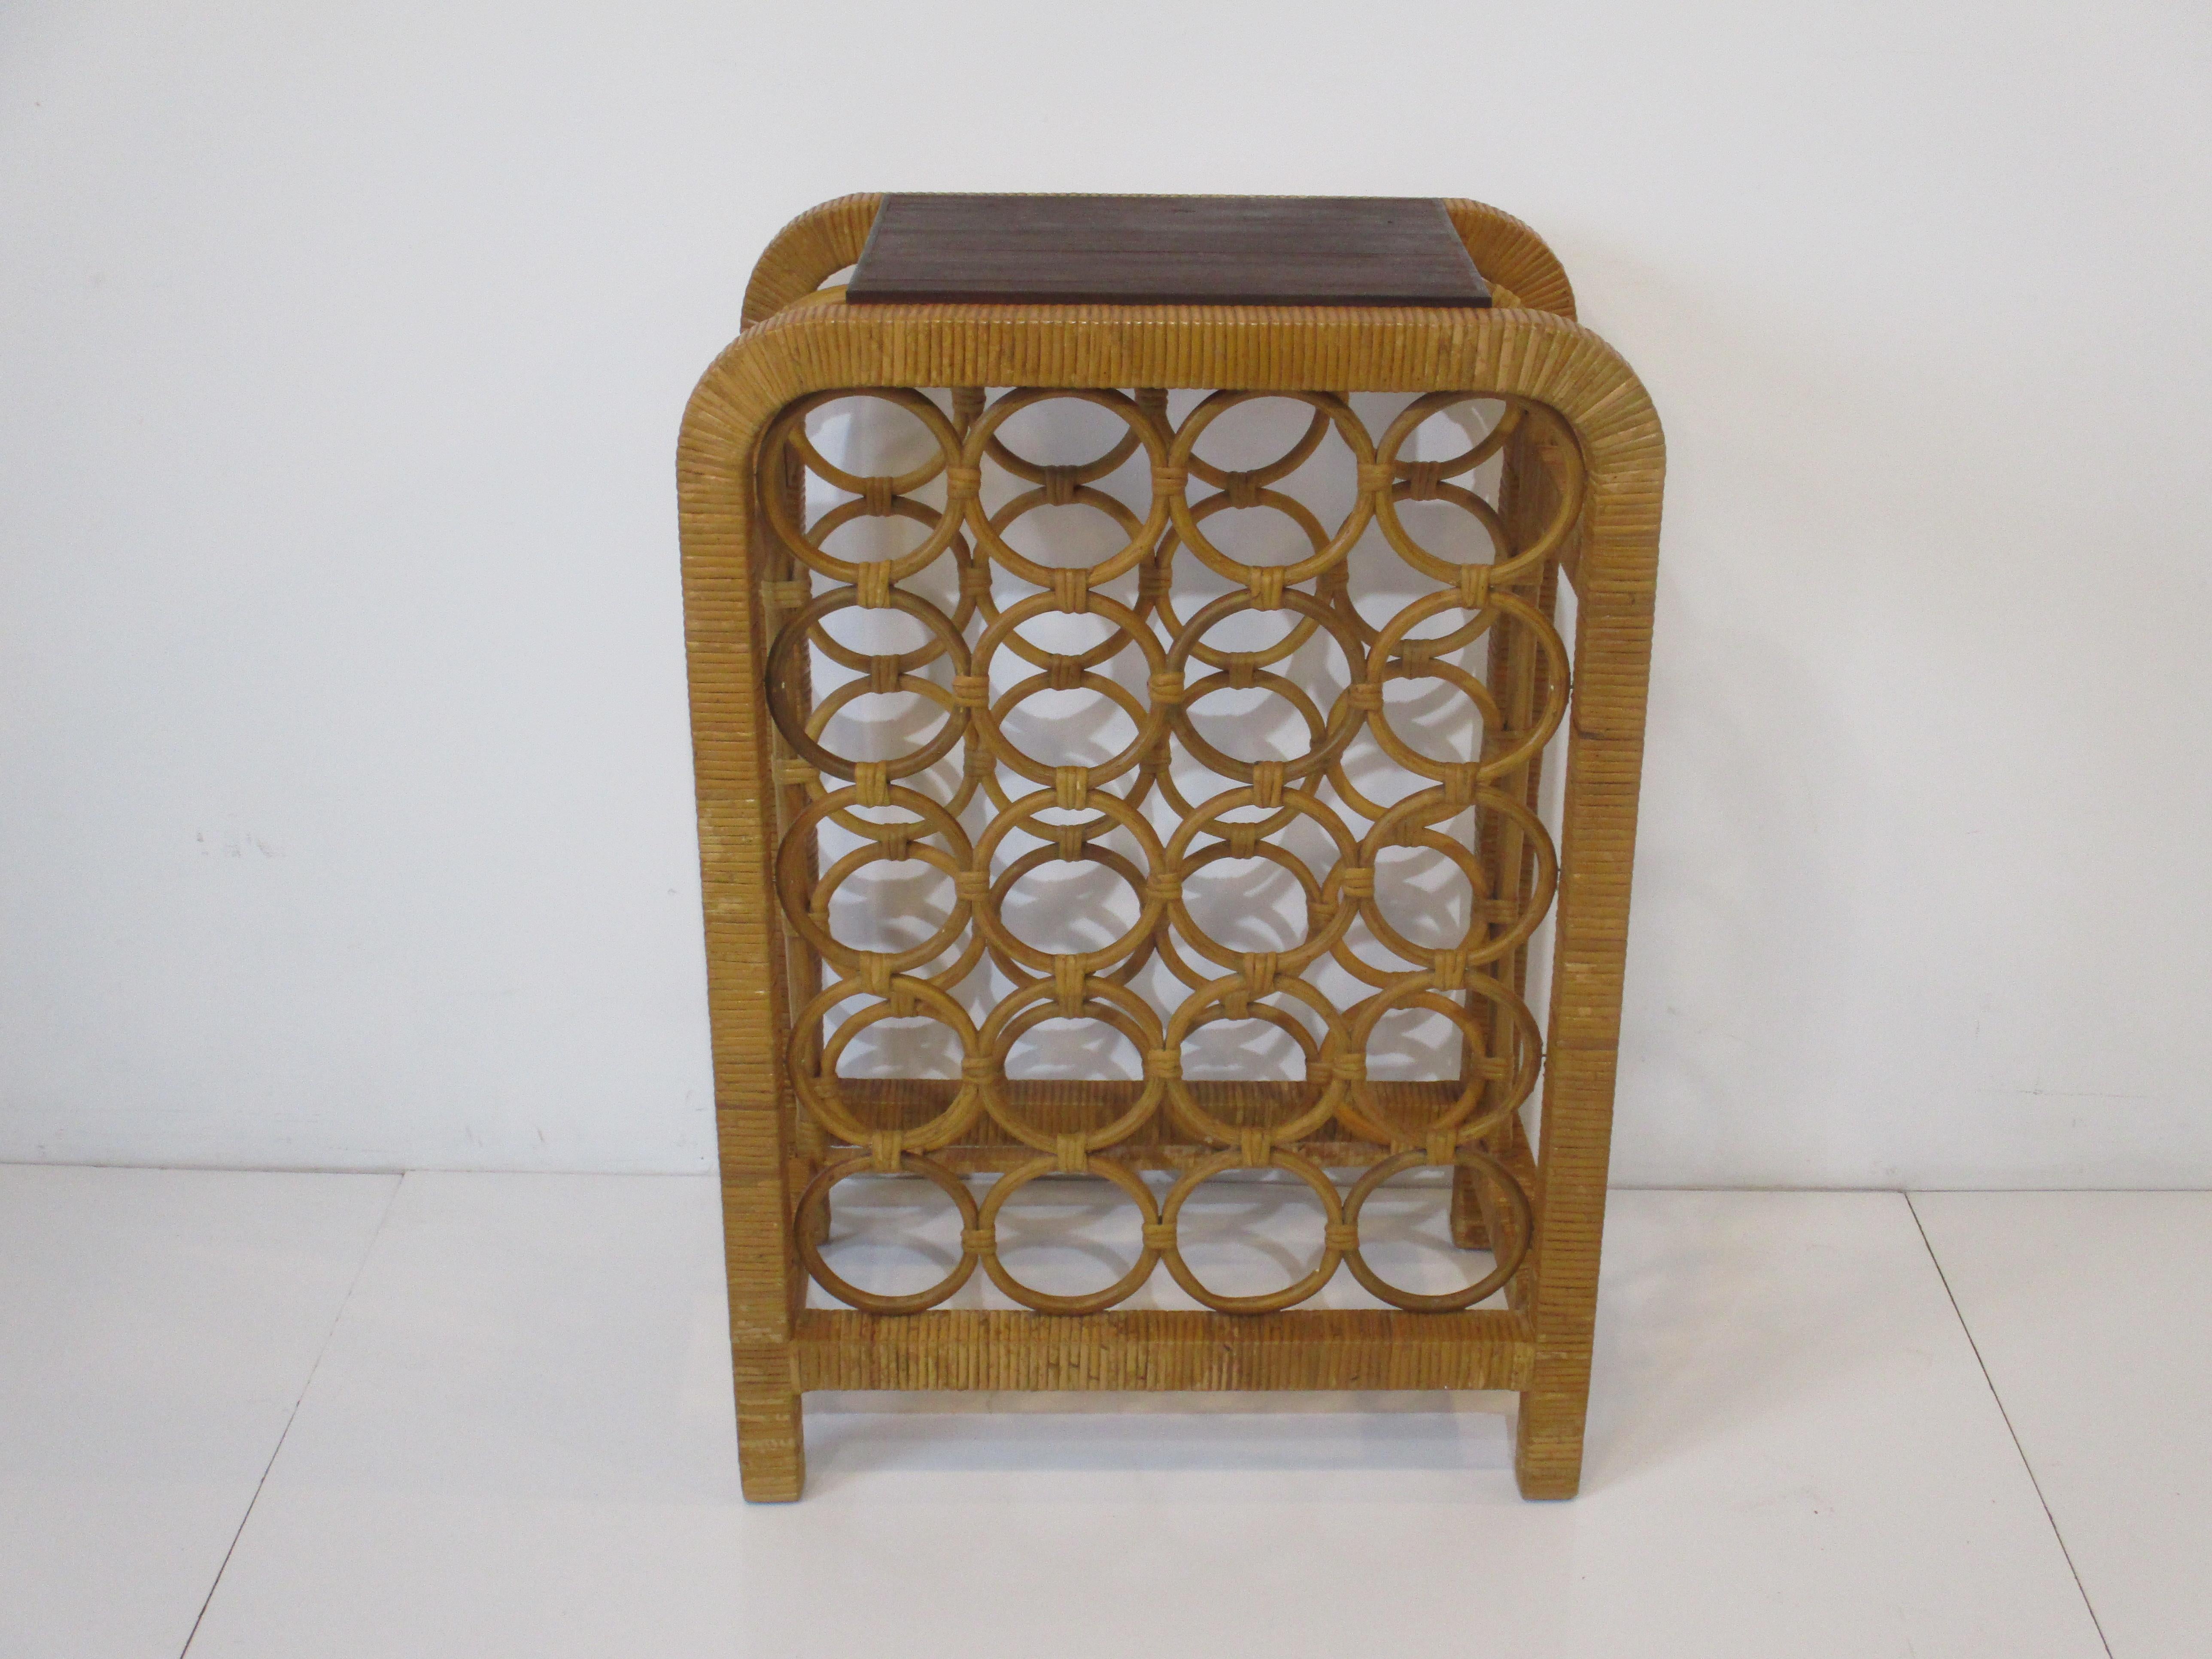 A woven rattan wine / bar rack with twenty spaces for wine or liquor bottles and topped with a dark butcher block serving area. Sized perfectly for a wall or corner area where space is a concern.